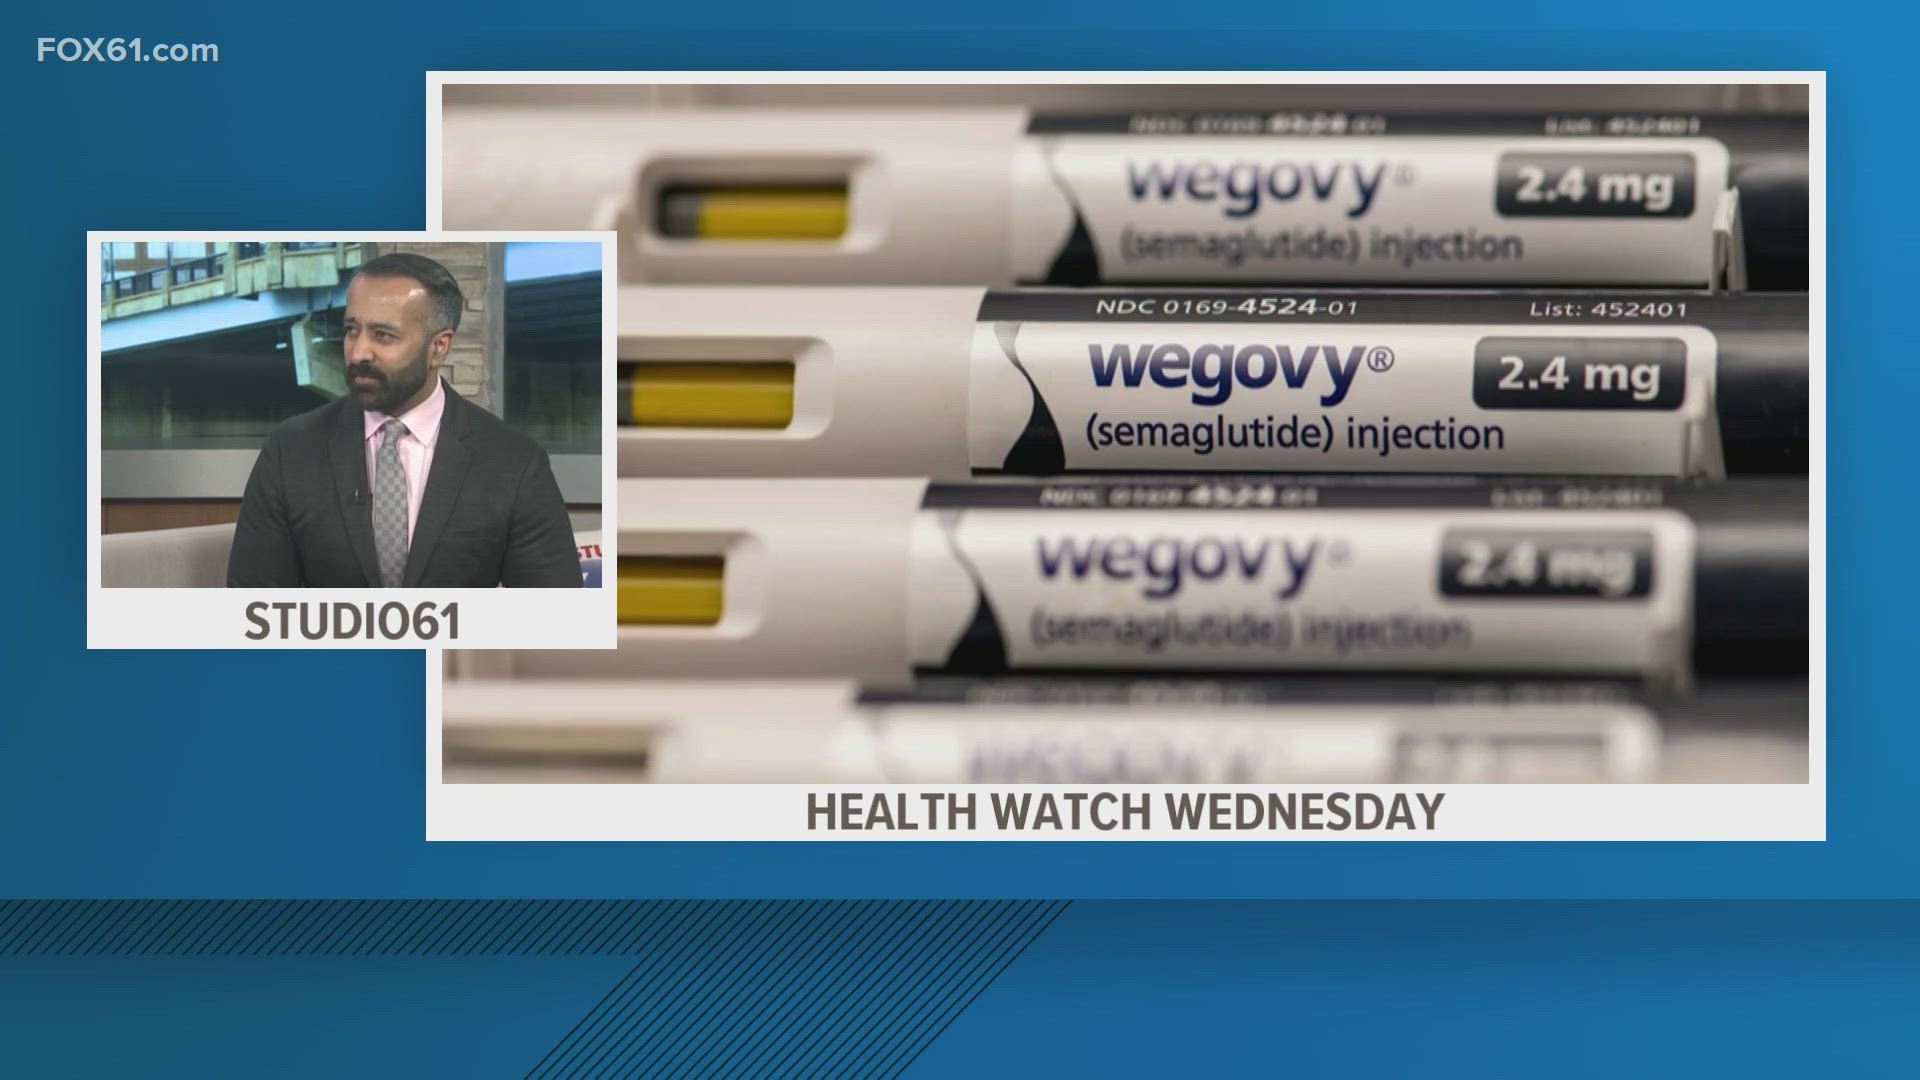 Dr. Syed Hussain from Trinity Health of New England, has the latest health news.